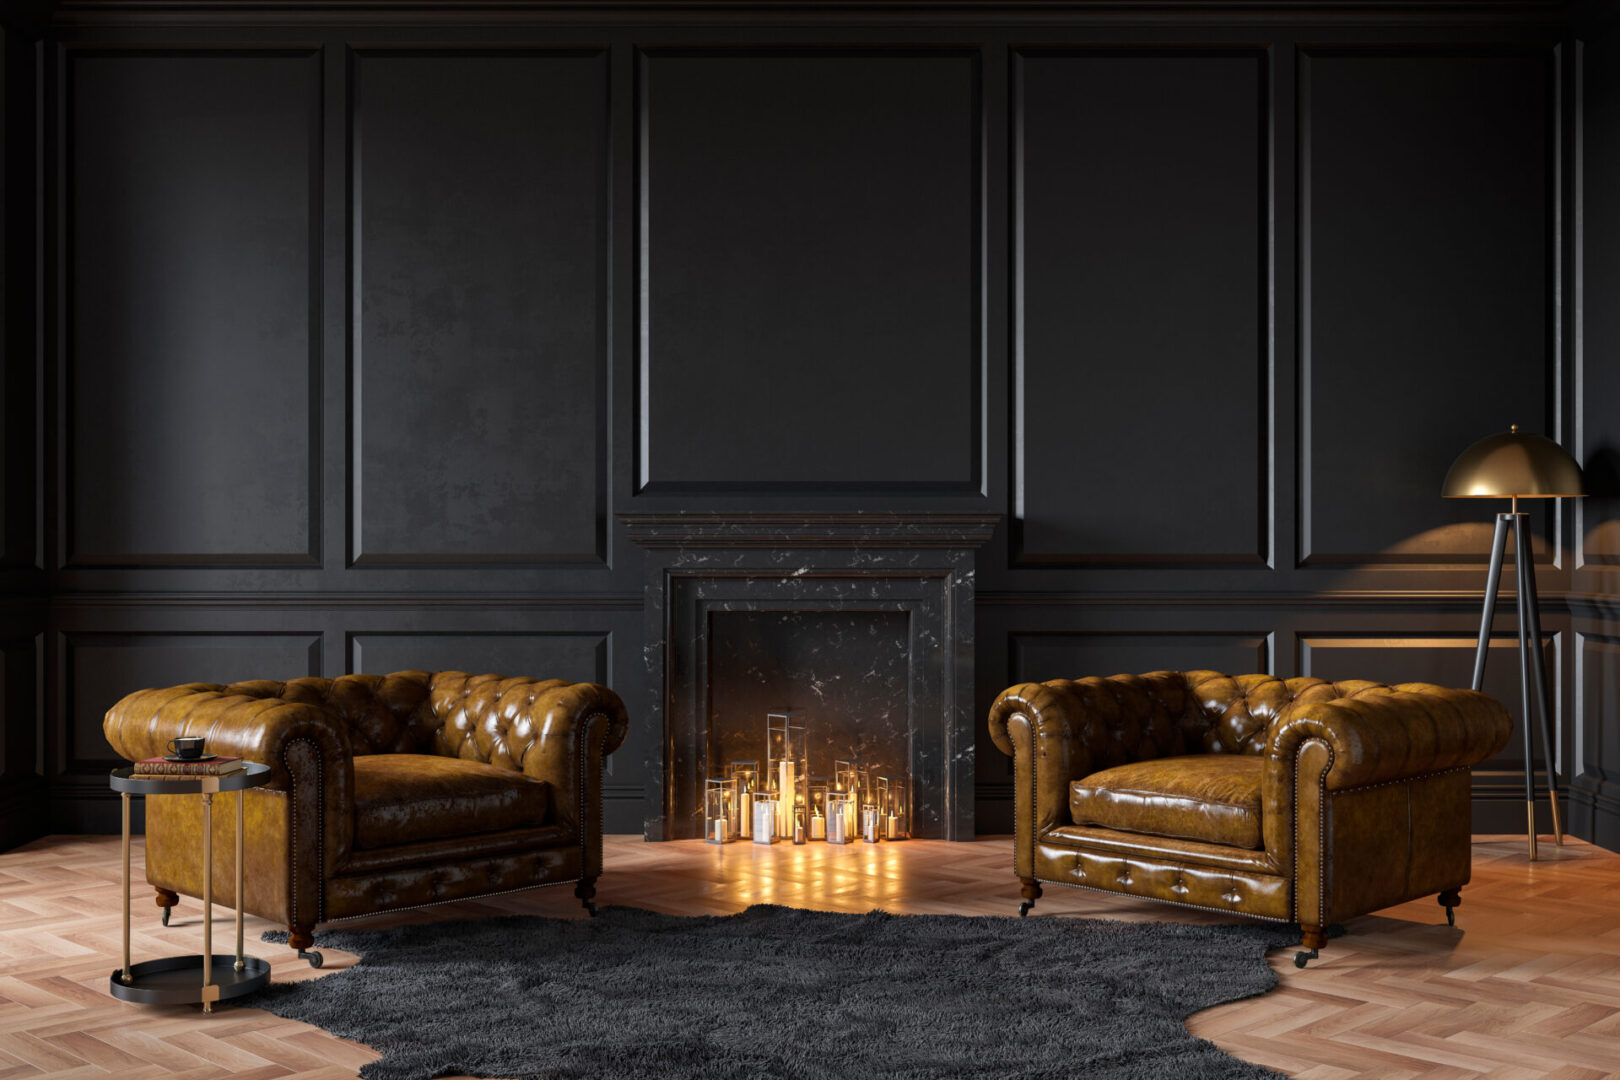 A fireplace in the middle of two leather chairs.